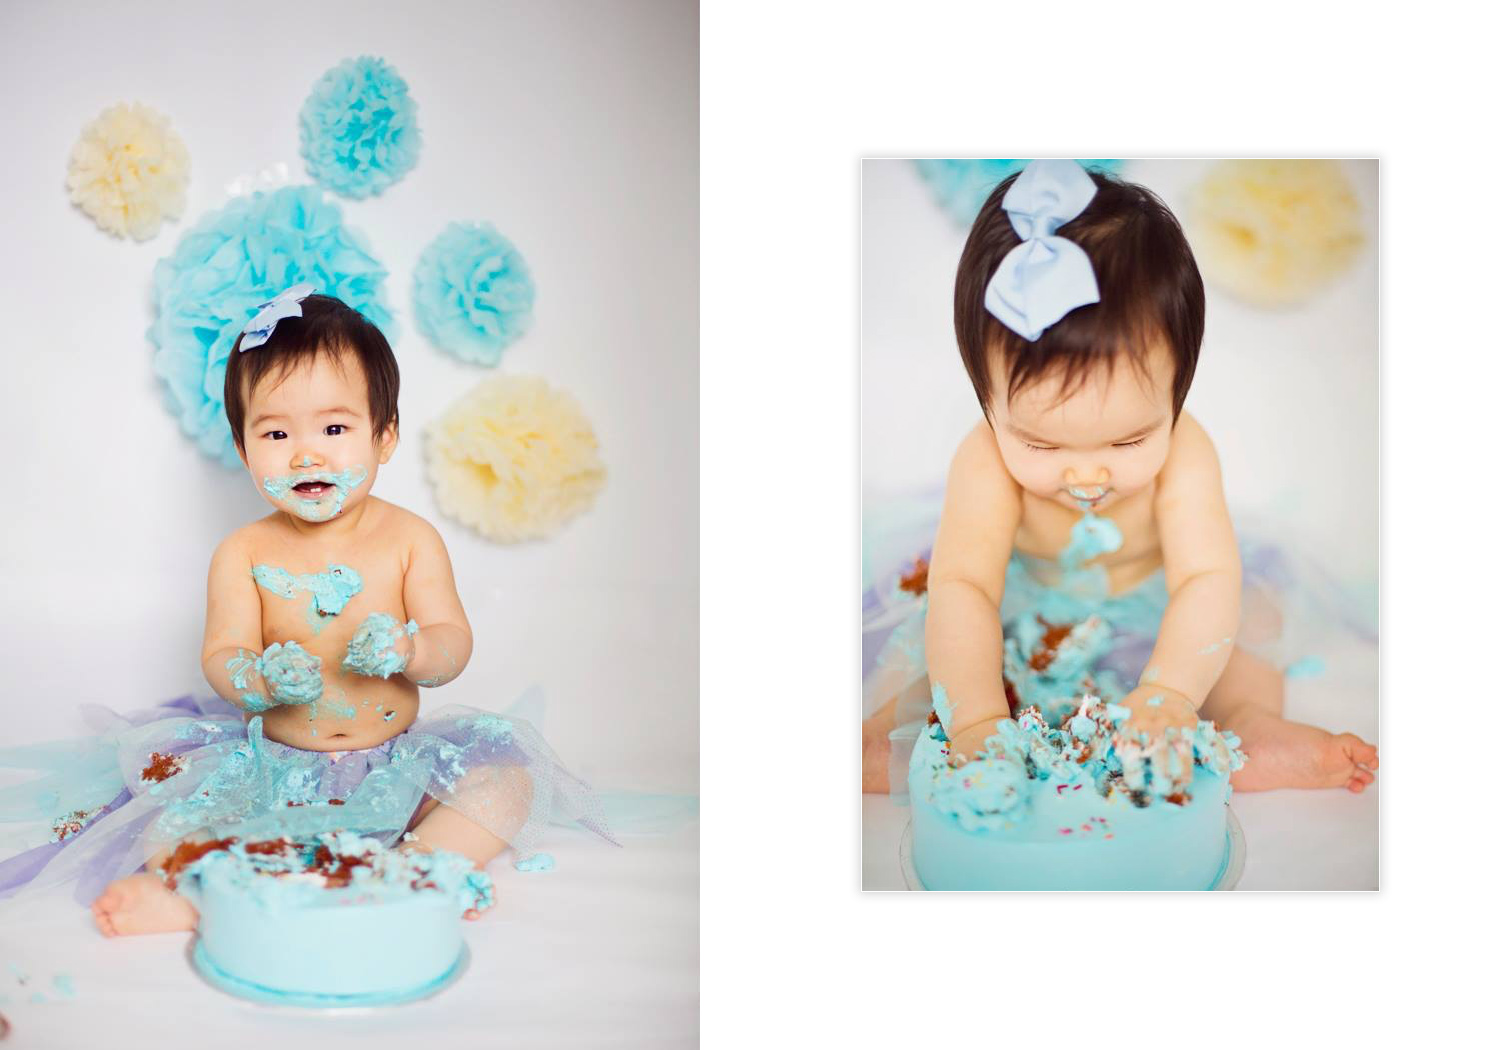 Healthy First Birthday Smash Cake Without Sugar - MJ and Hungryman